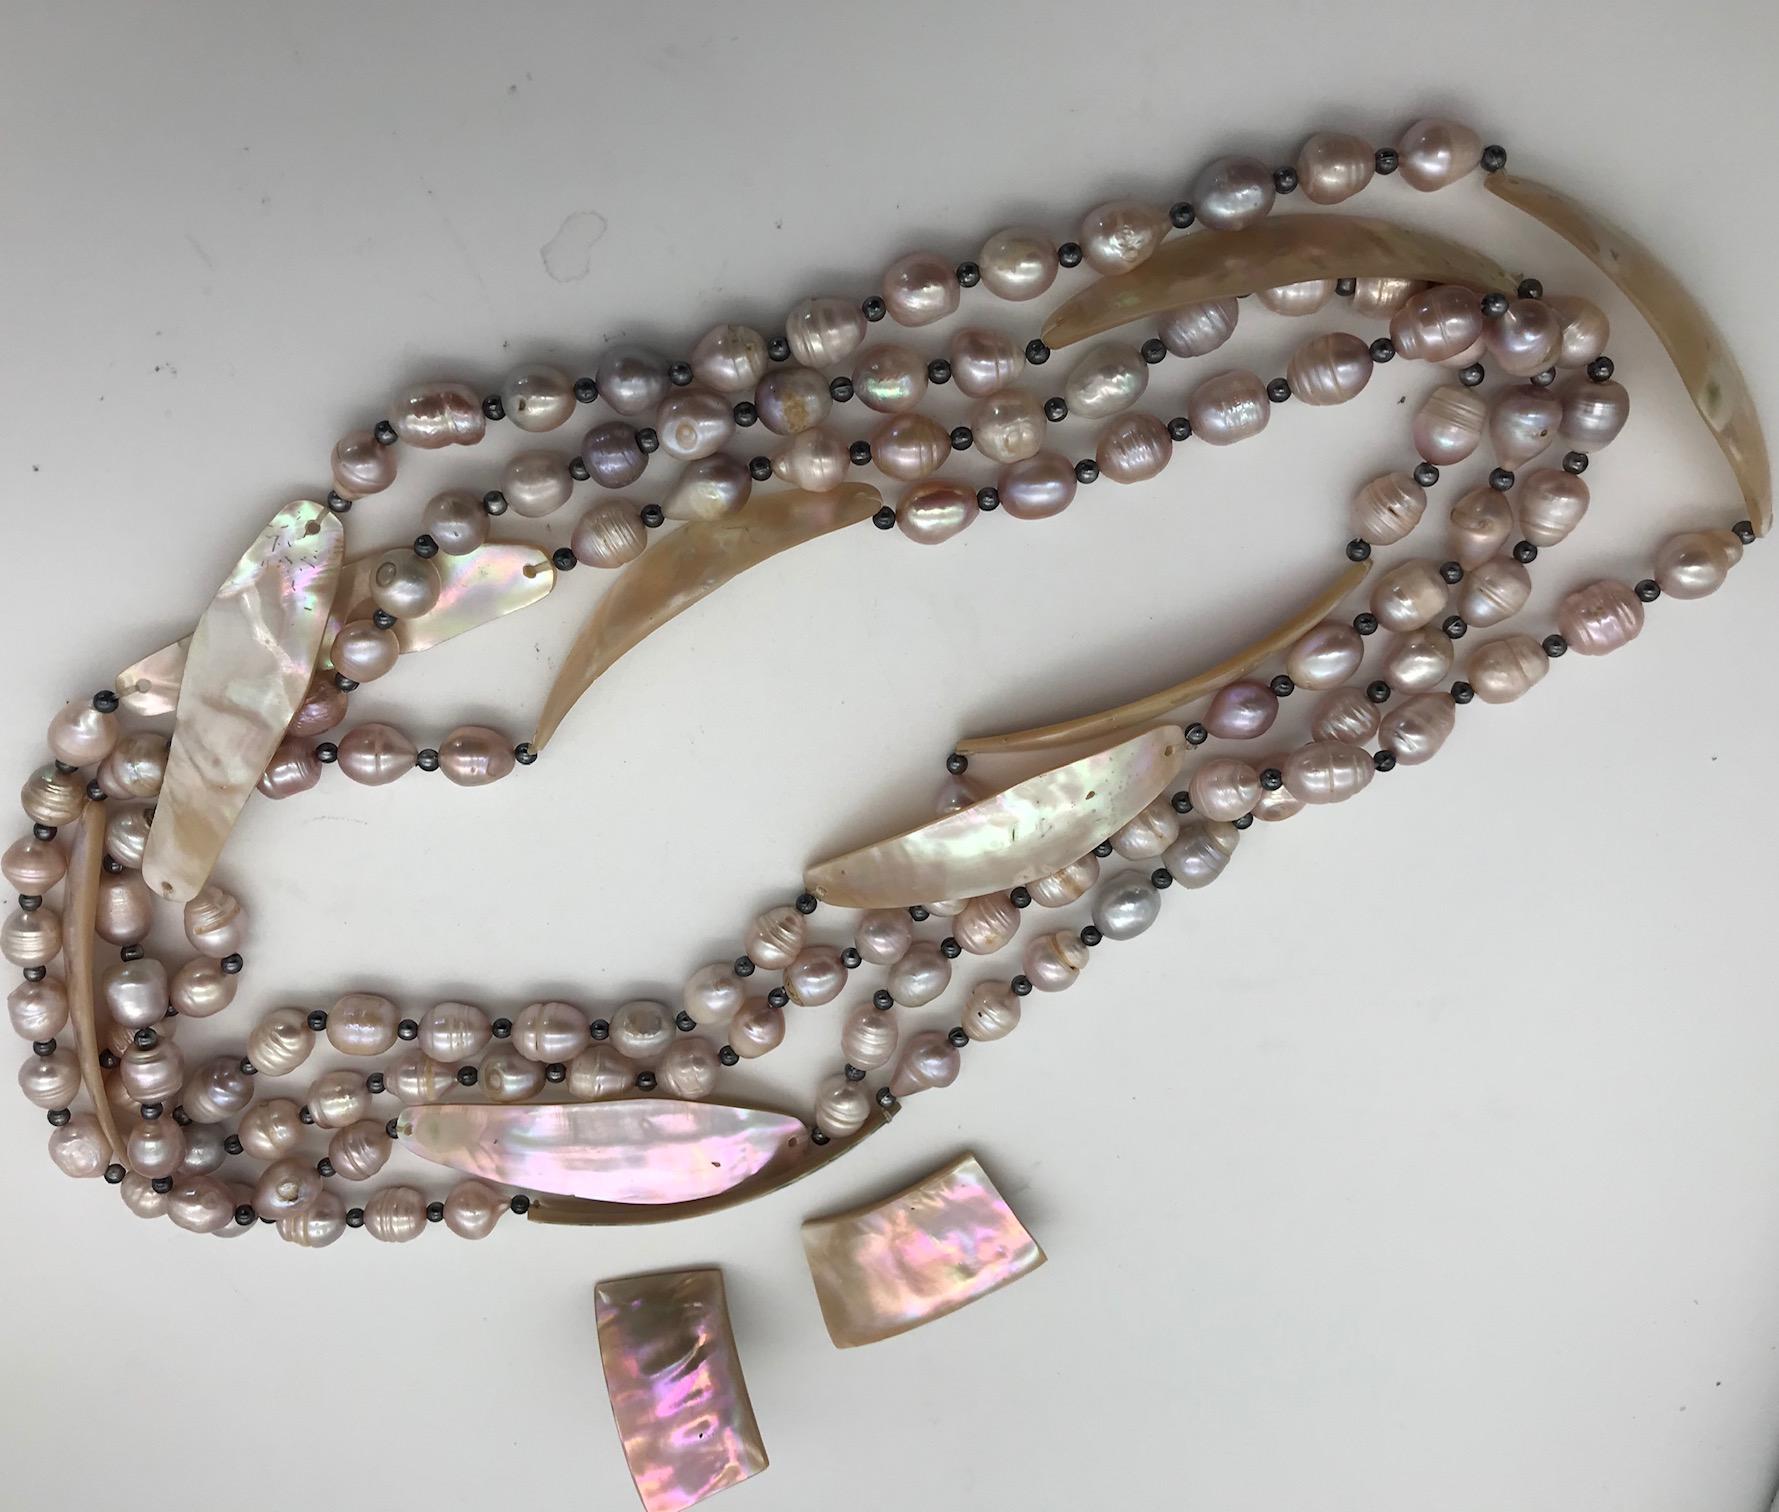 2 Large Pink Pearl Necklaces with Pink French Deco nacre pieces and matching clip Earrings. The pink  nacre used in design of this Necklace is no longer possible to find, due to disappearance of a large Turbo snails. The pearls are exceptionally